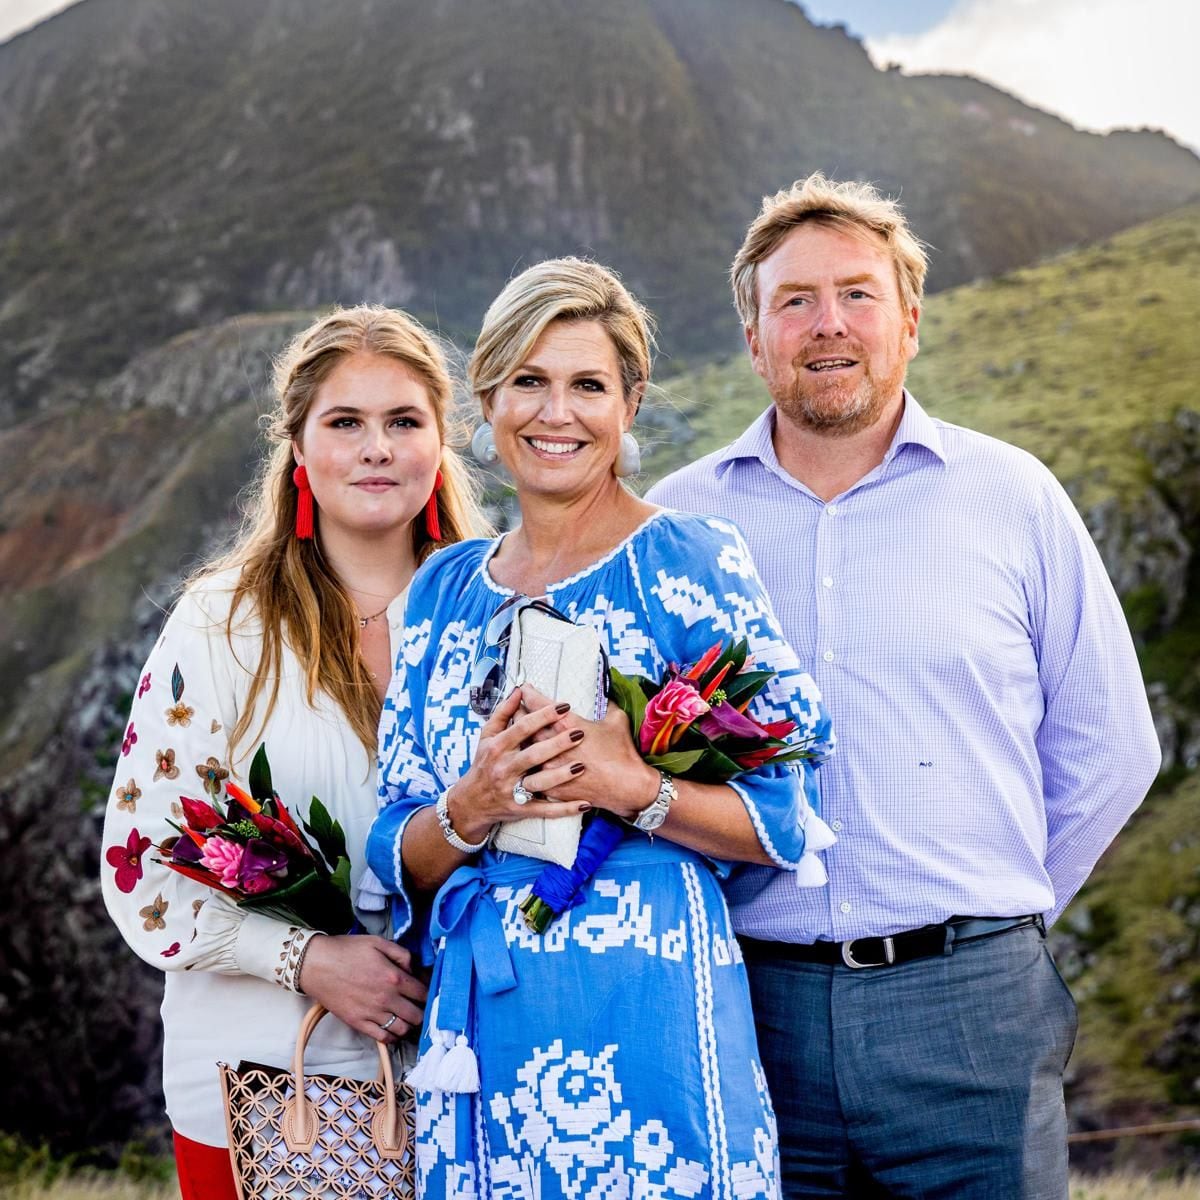 Queen Maxima and King Willem Alexander’s eldest daughter will attend a reception at Buckingham Palace the day before King Charles’ coronation